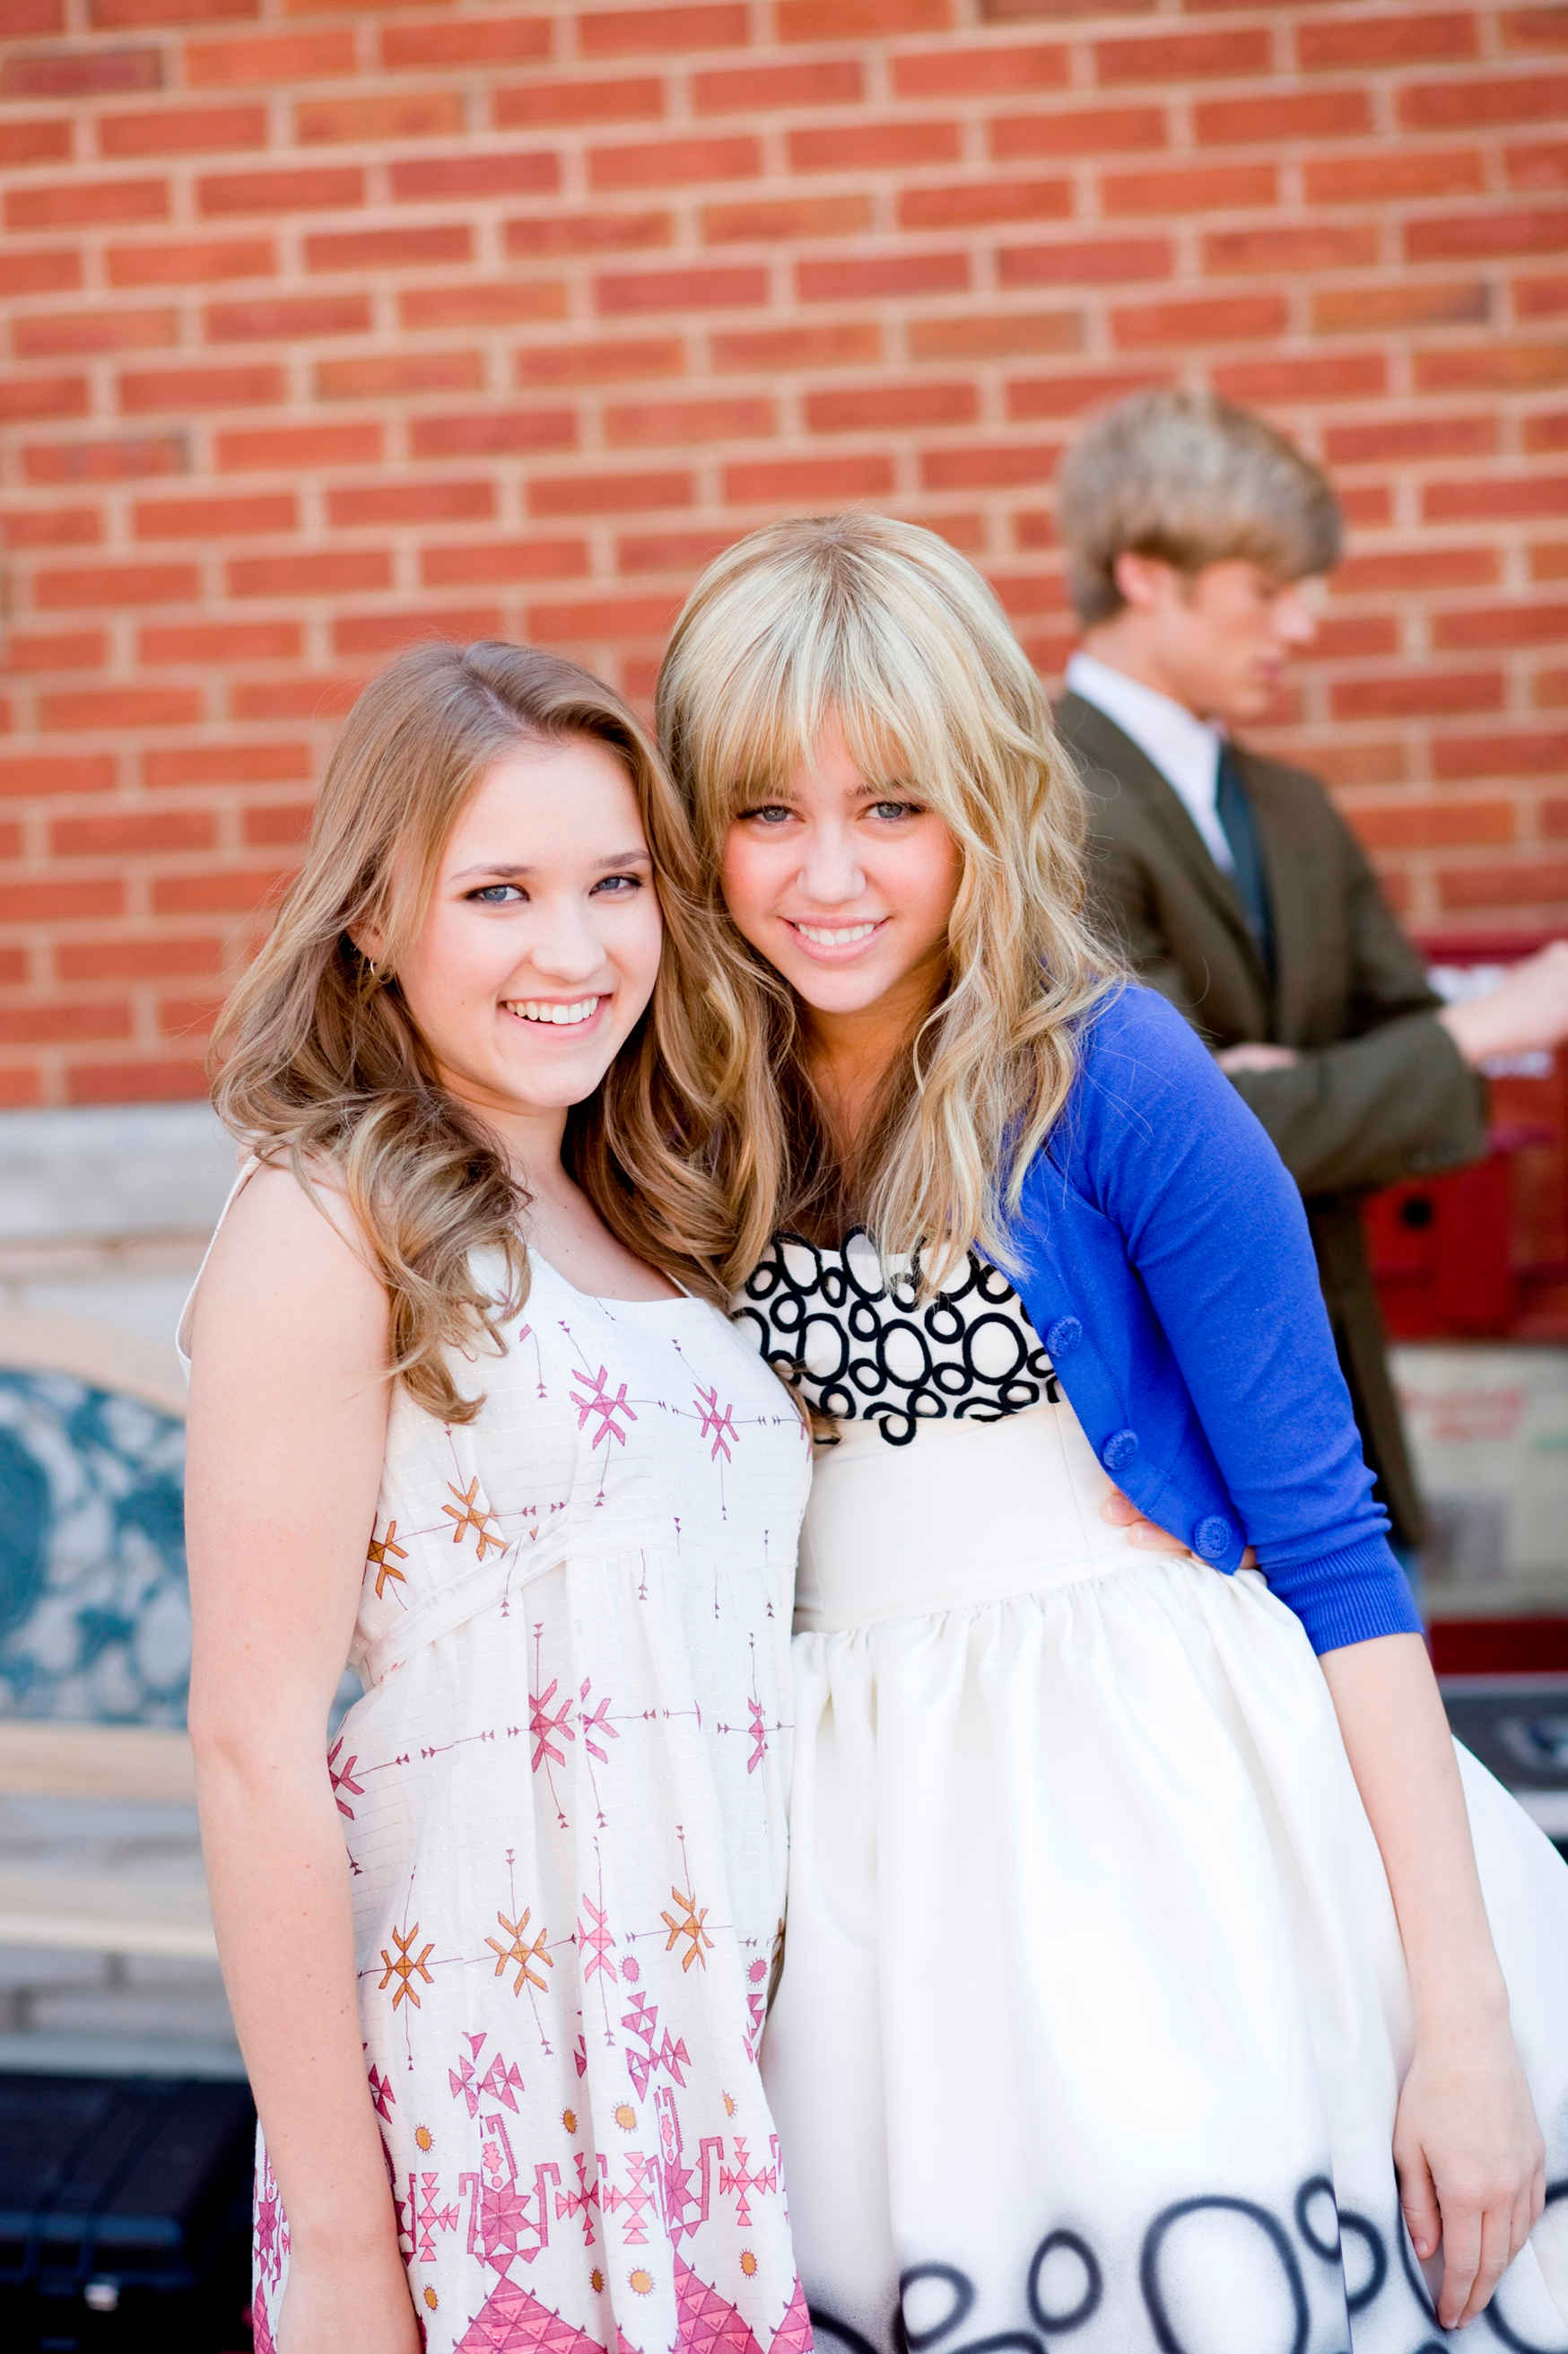 Emily Osment stars as Lilly Truscott / Lola Luftnagle and Miley Cyrus stars as Hannah Montana / Miley Stewart in Walt Disney Pictures' Hannah Montana: The Movie (2009)